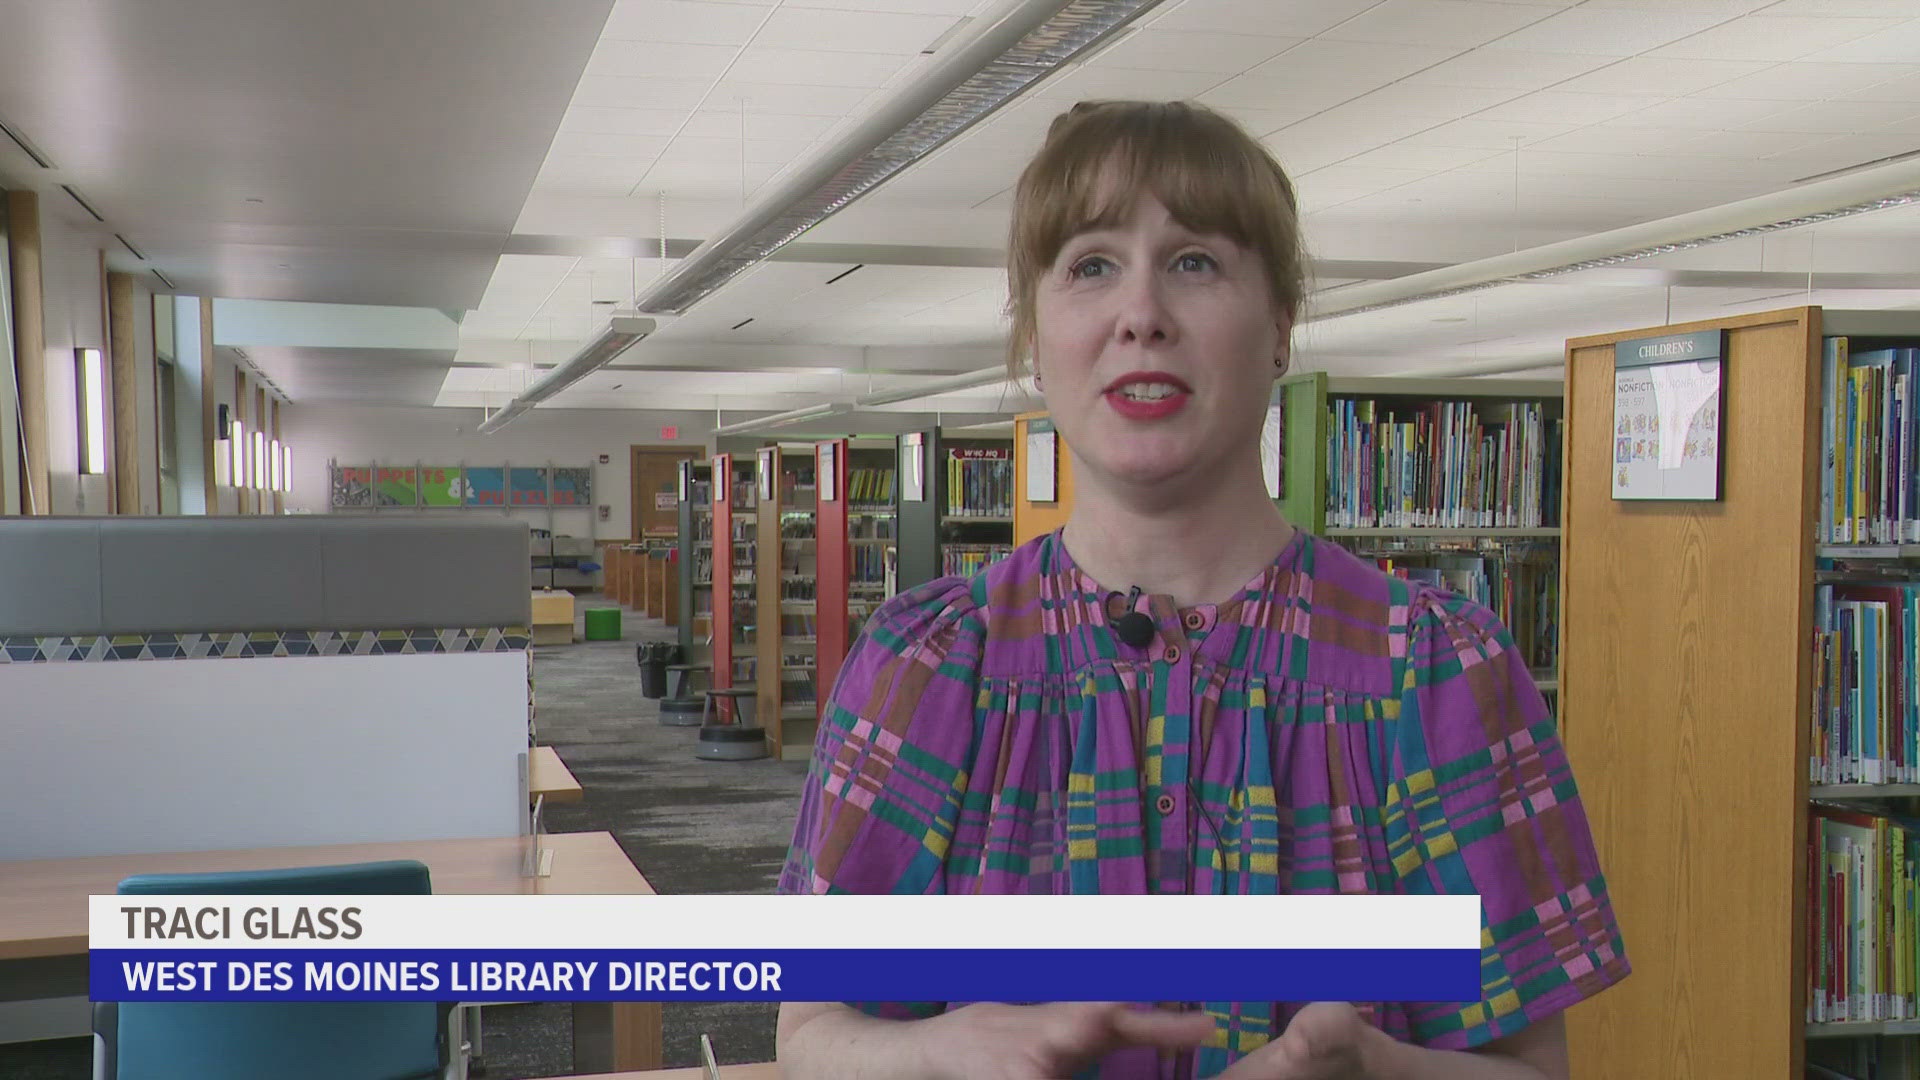 Traci Glass comes from Lincoln City libraries over in Nebraska and was the unanimous choice after a months-long nationwide search to fill the position.